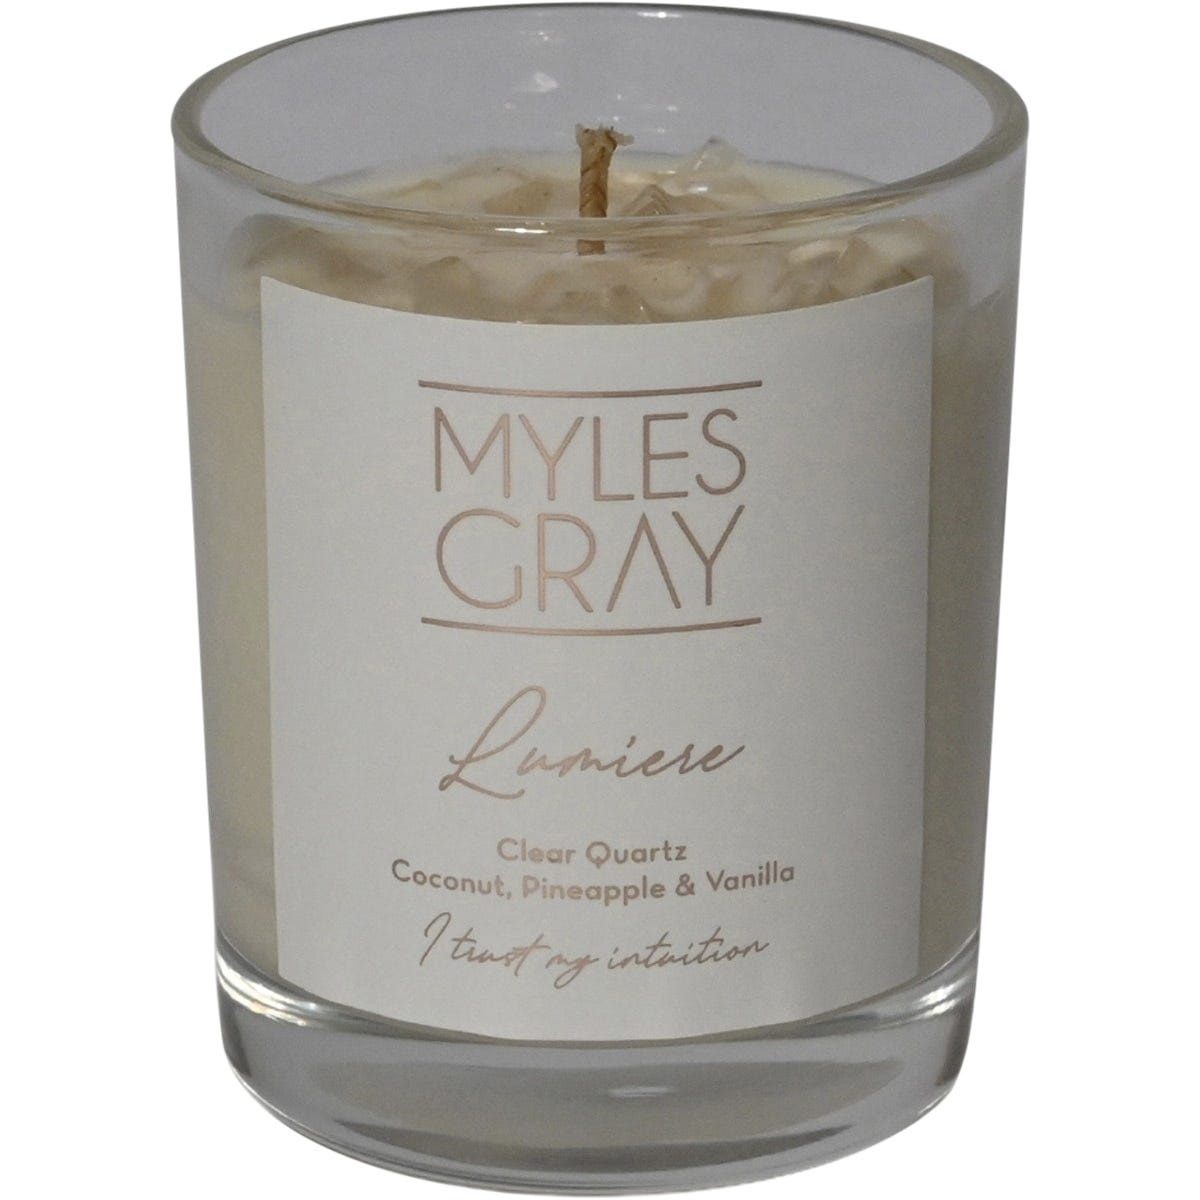 Myles Gray Crystal Infused Soy Candle Mini Coconut Pineapple